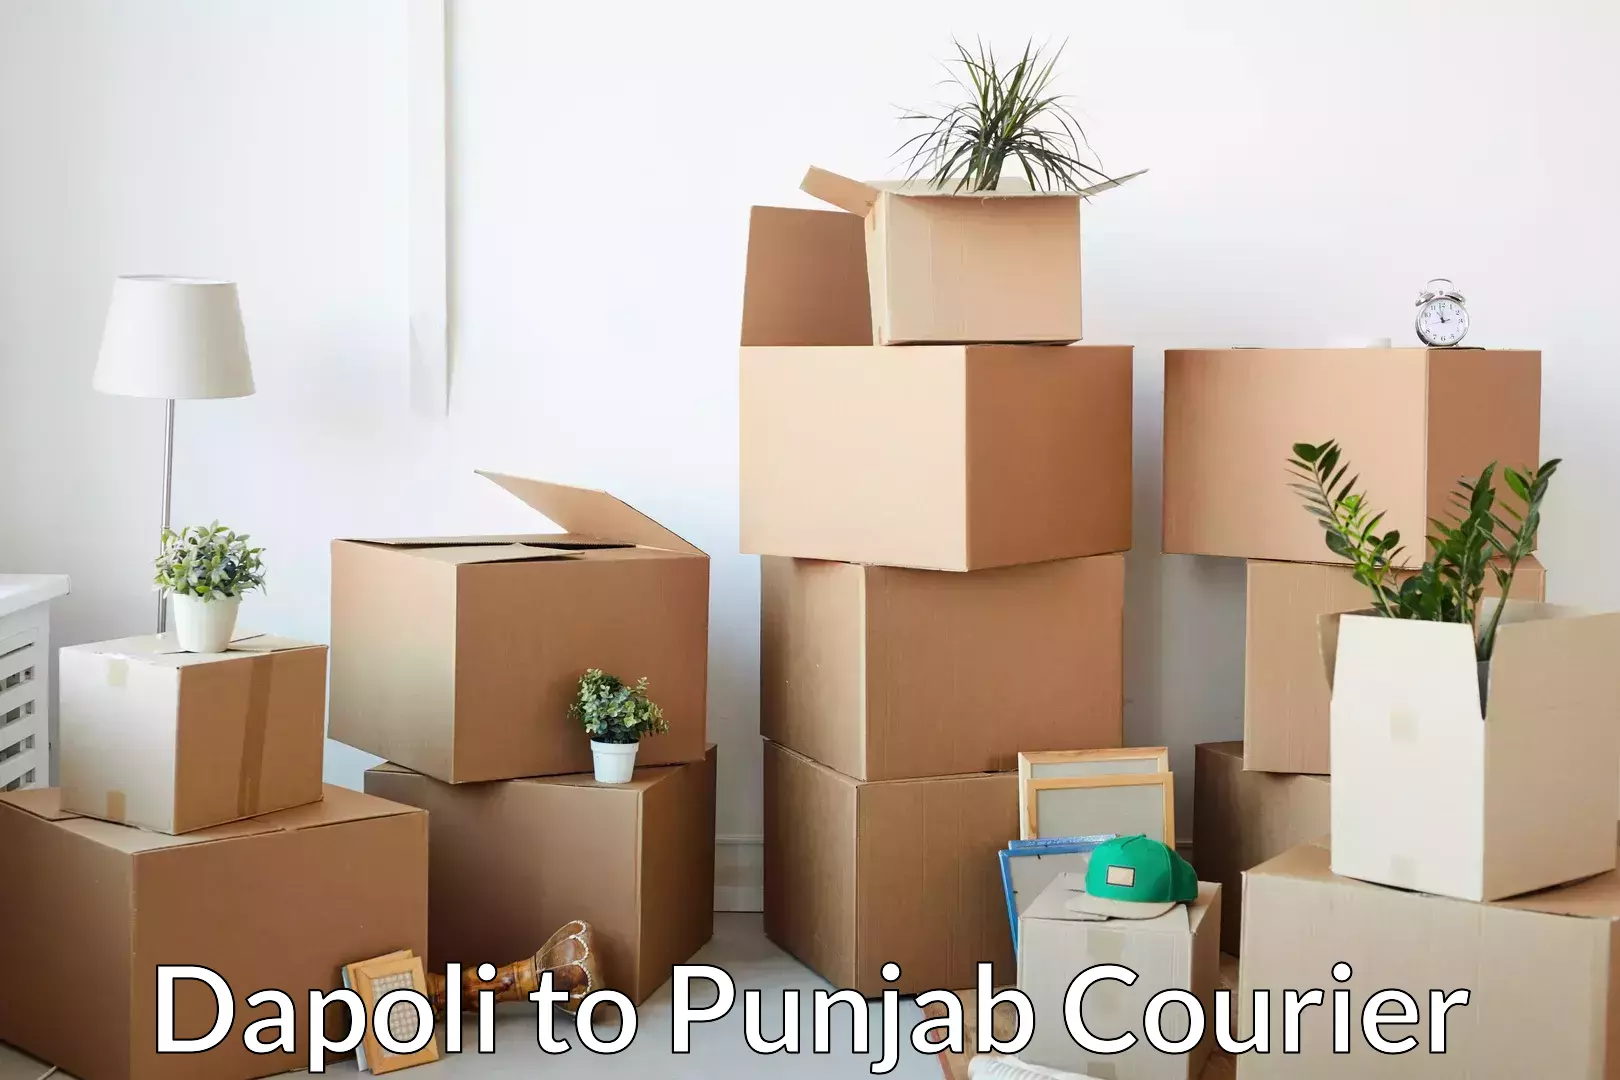 Professional movers and packers Dapoli to Punjab